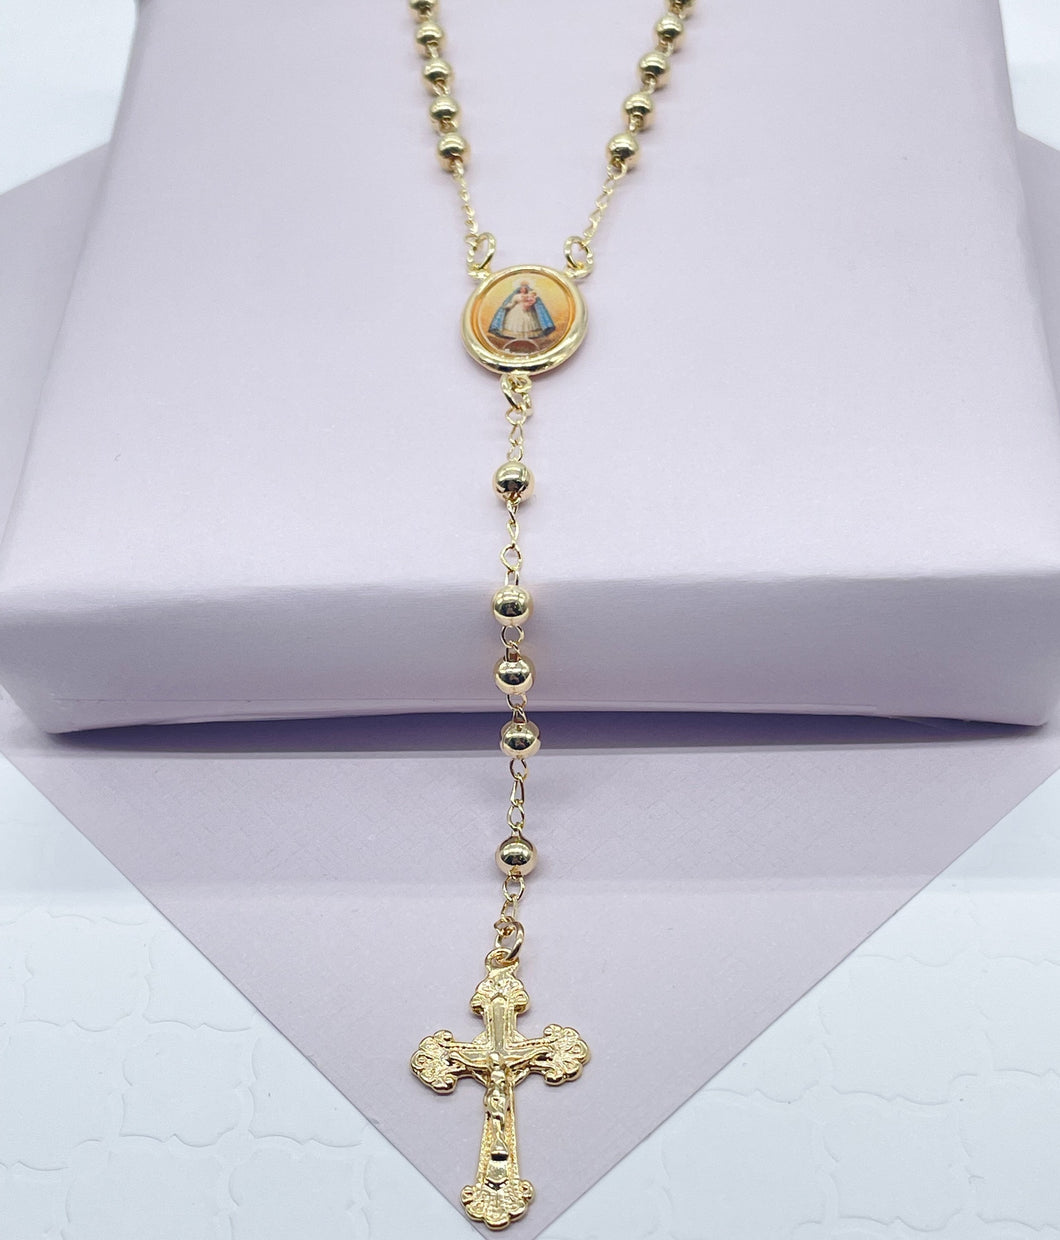 18k Gold Filled Medium Bead Rosary Necklace with Virgin Image Photo Like, Trendy